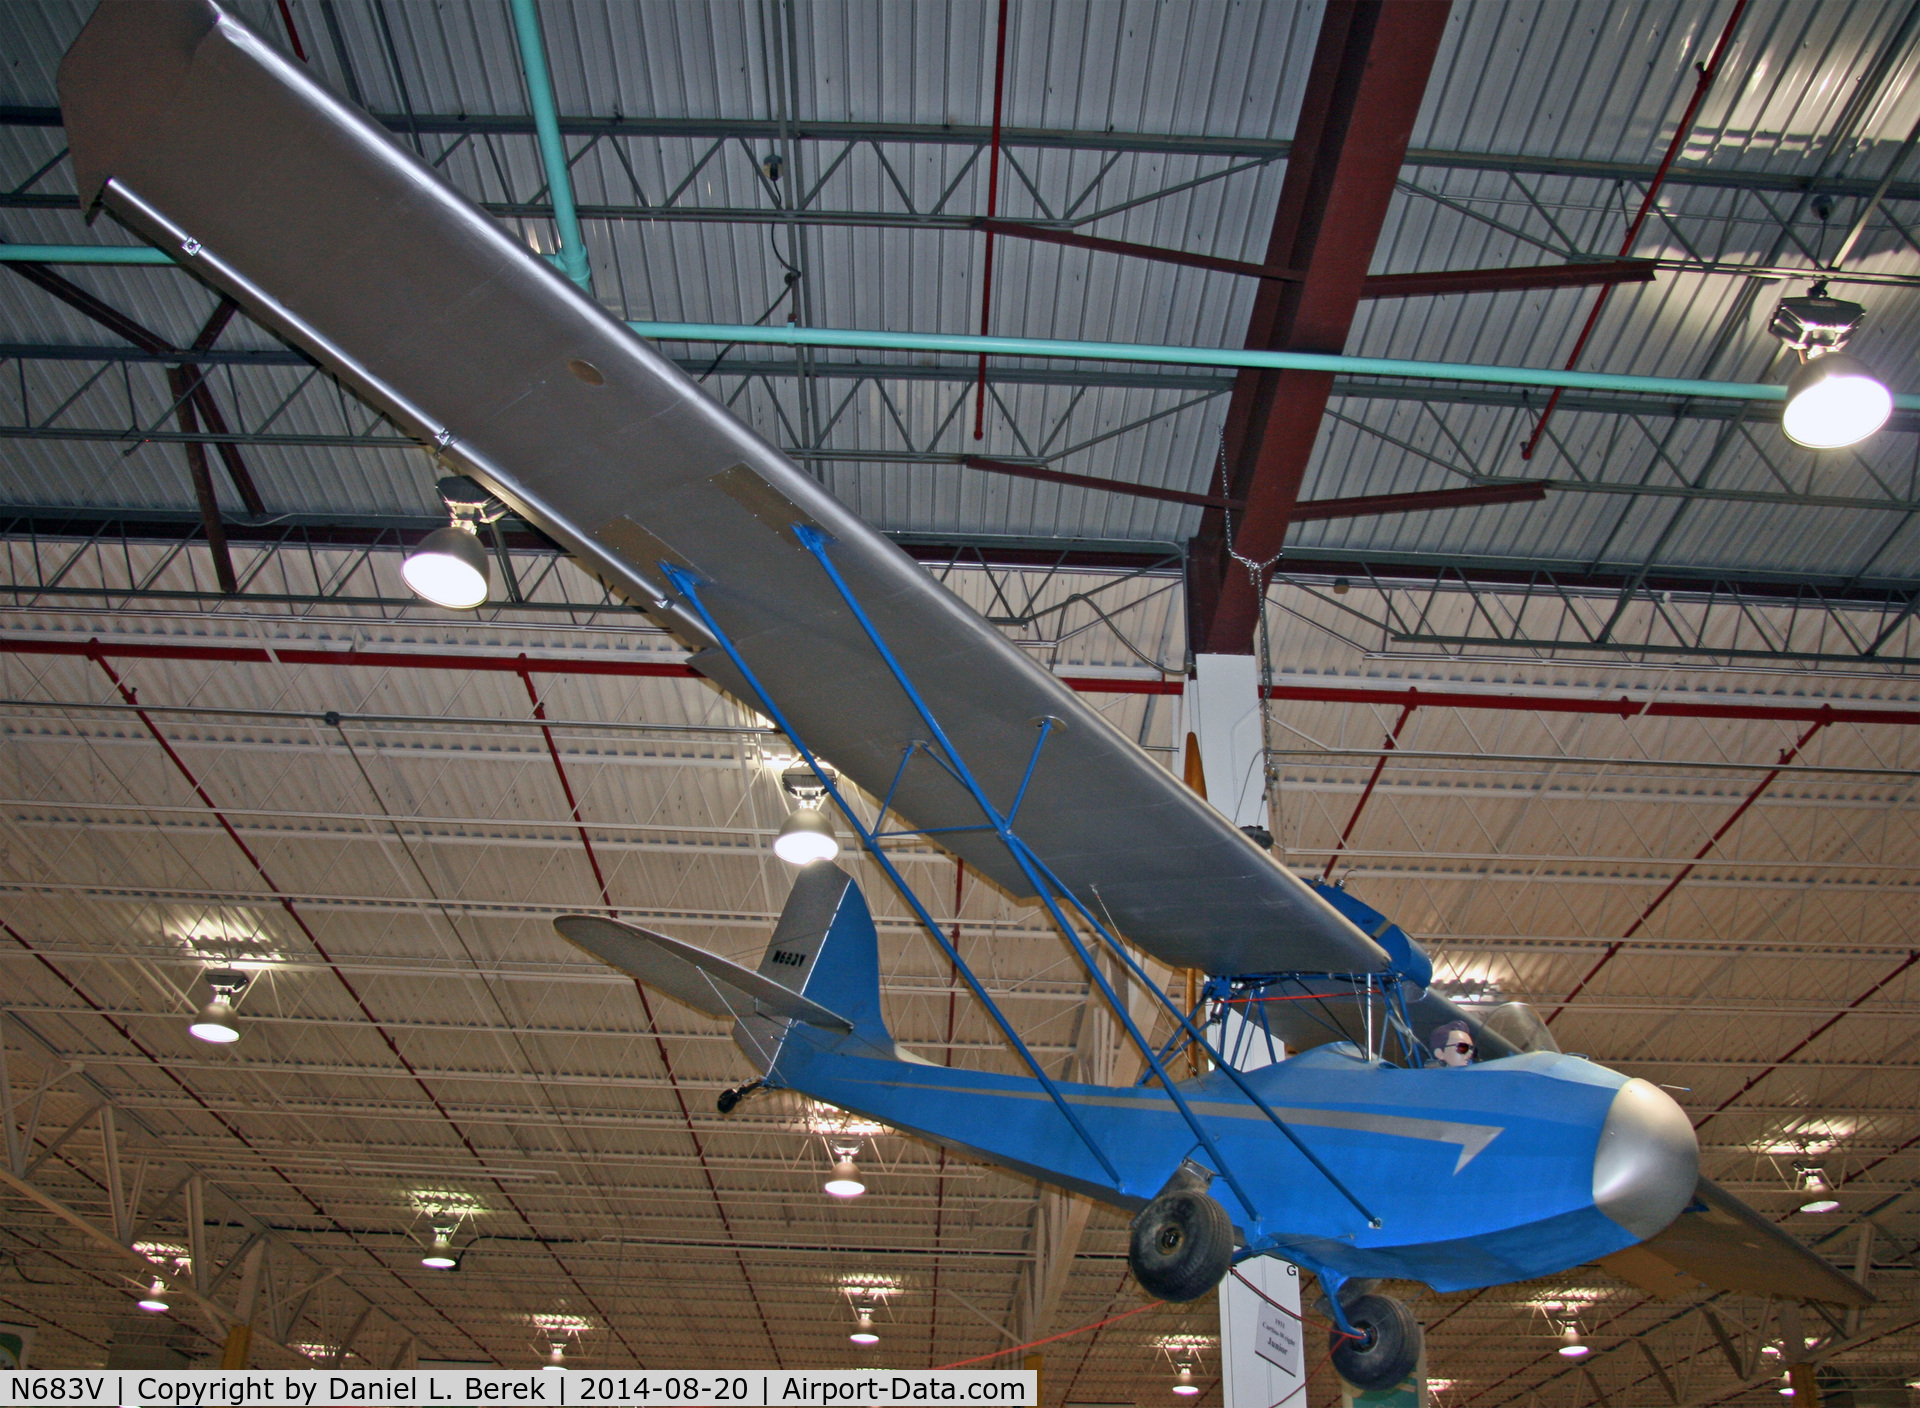 N683V, 1931 Curtiss-Wright JR CW1 C/N 1065, This 1931 Golden Age gem is now on display at the Glenn H. Curtiss Museum.